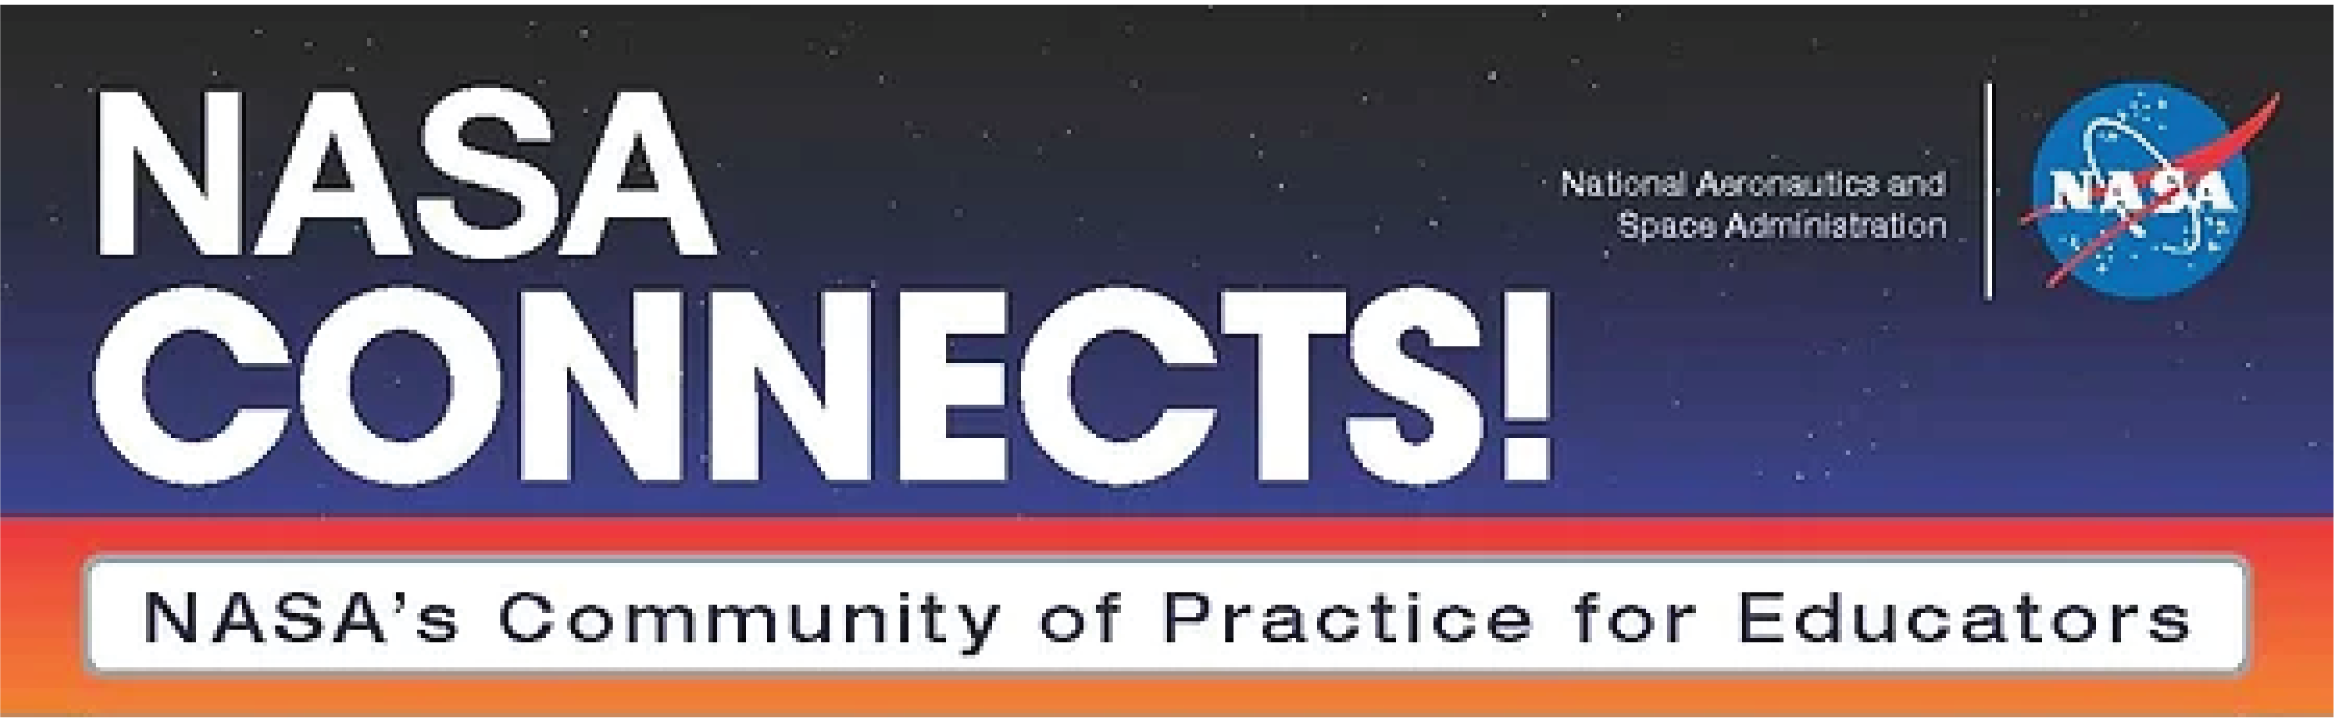 NASA CONNECTS! NASA's Community of Practice for Educators.